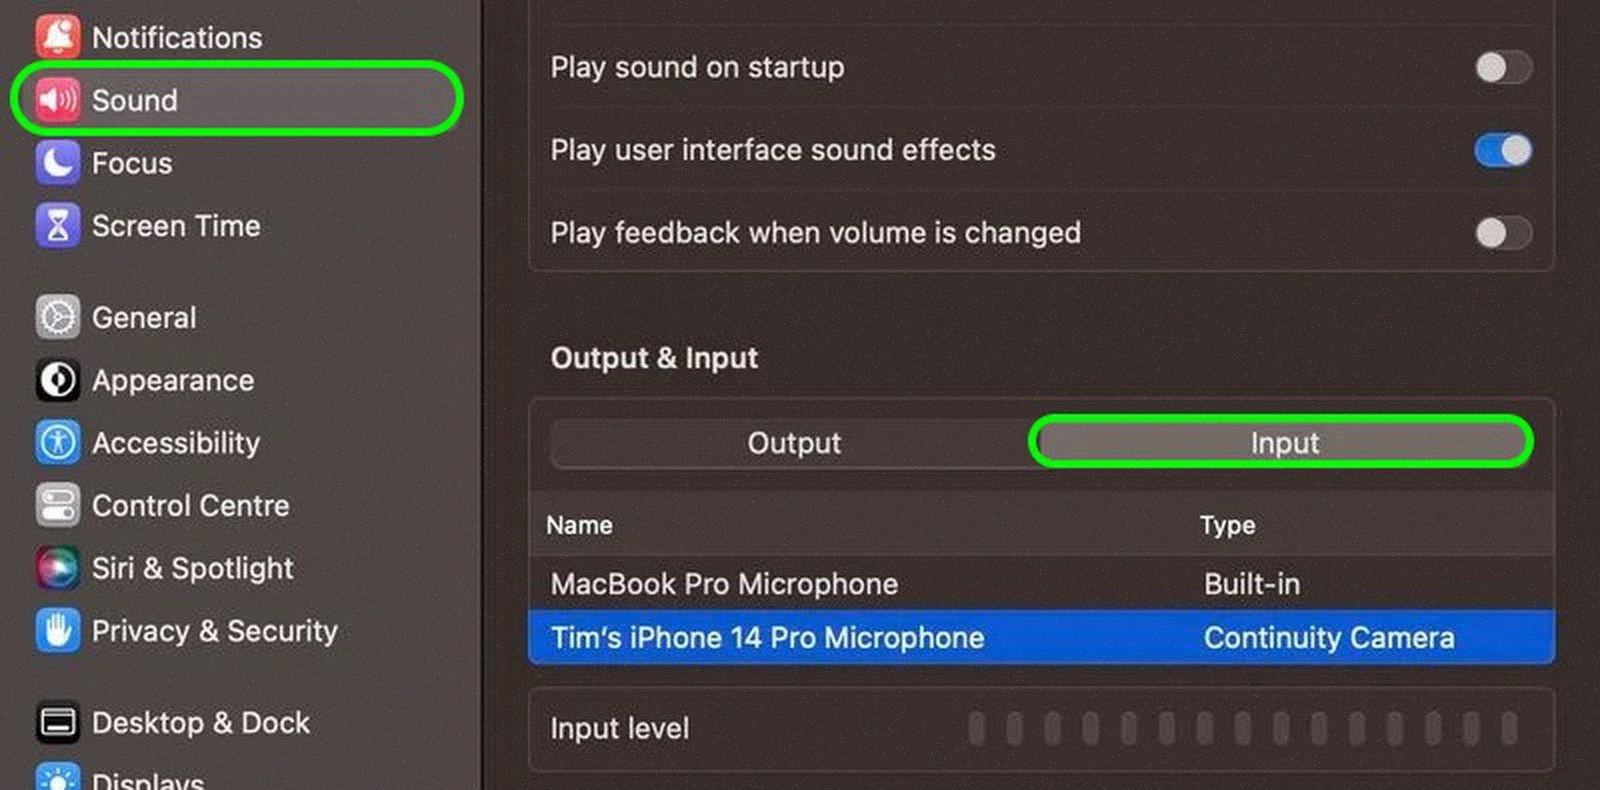 Go to Sound and select Input